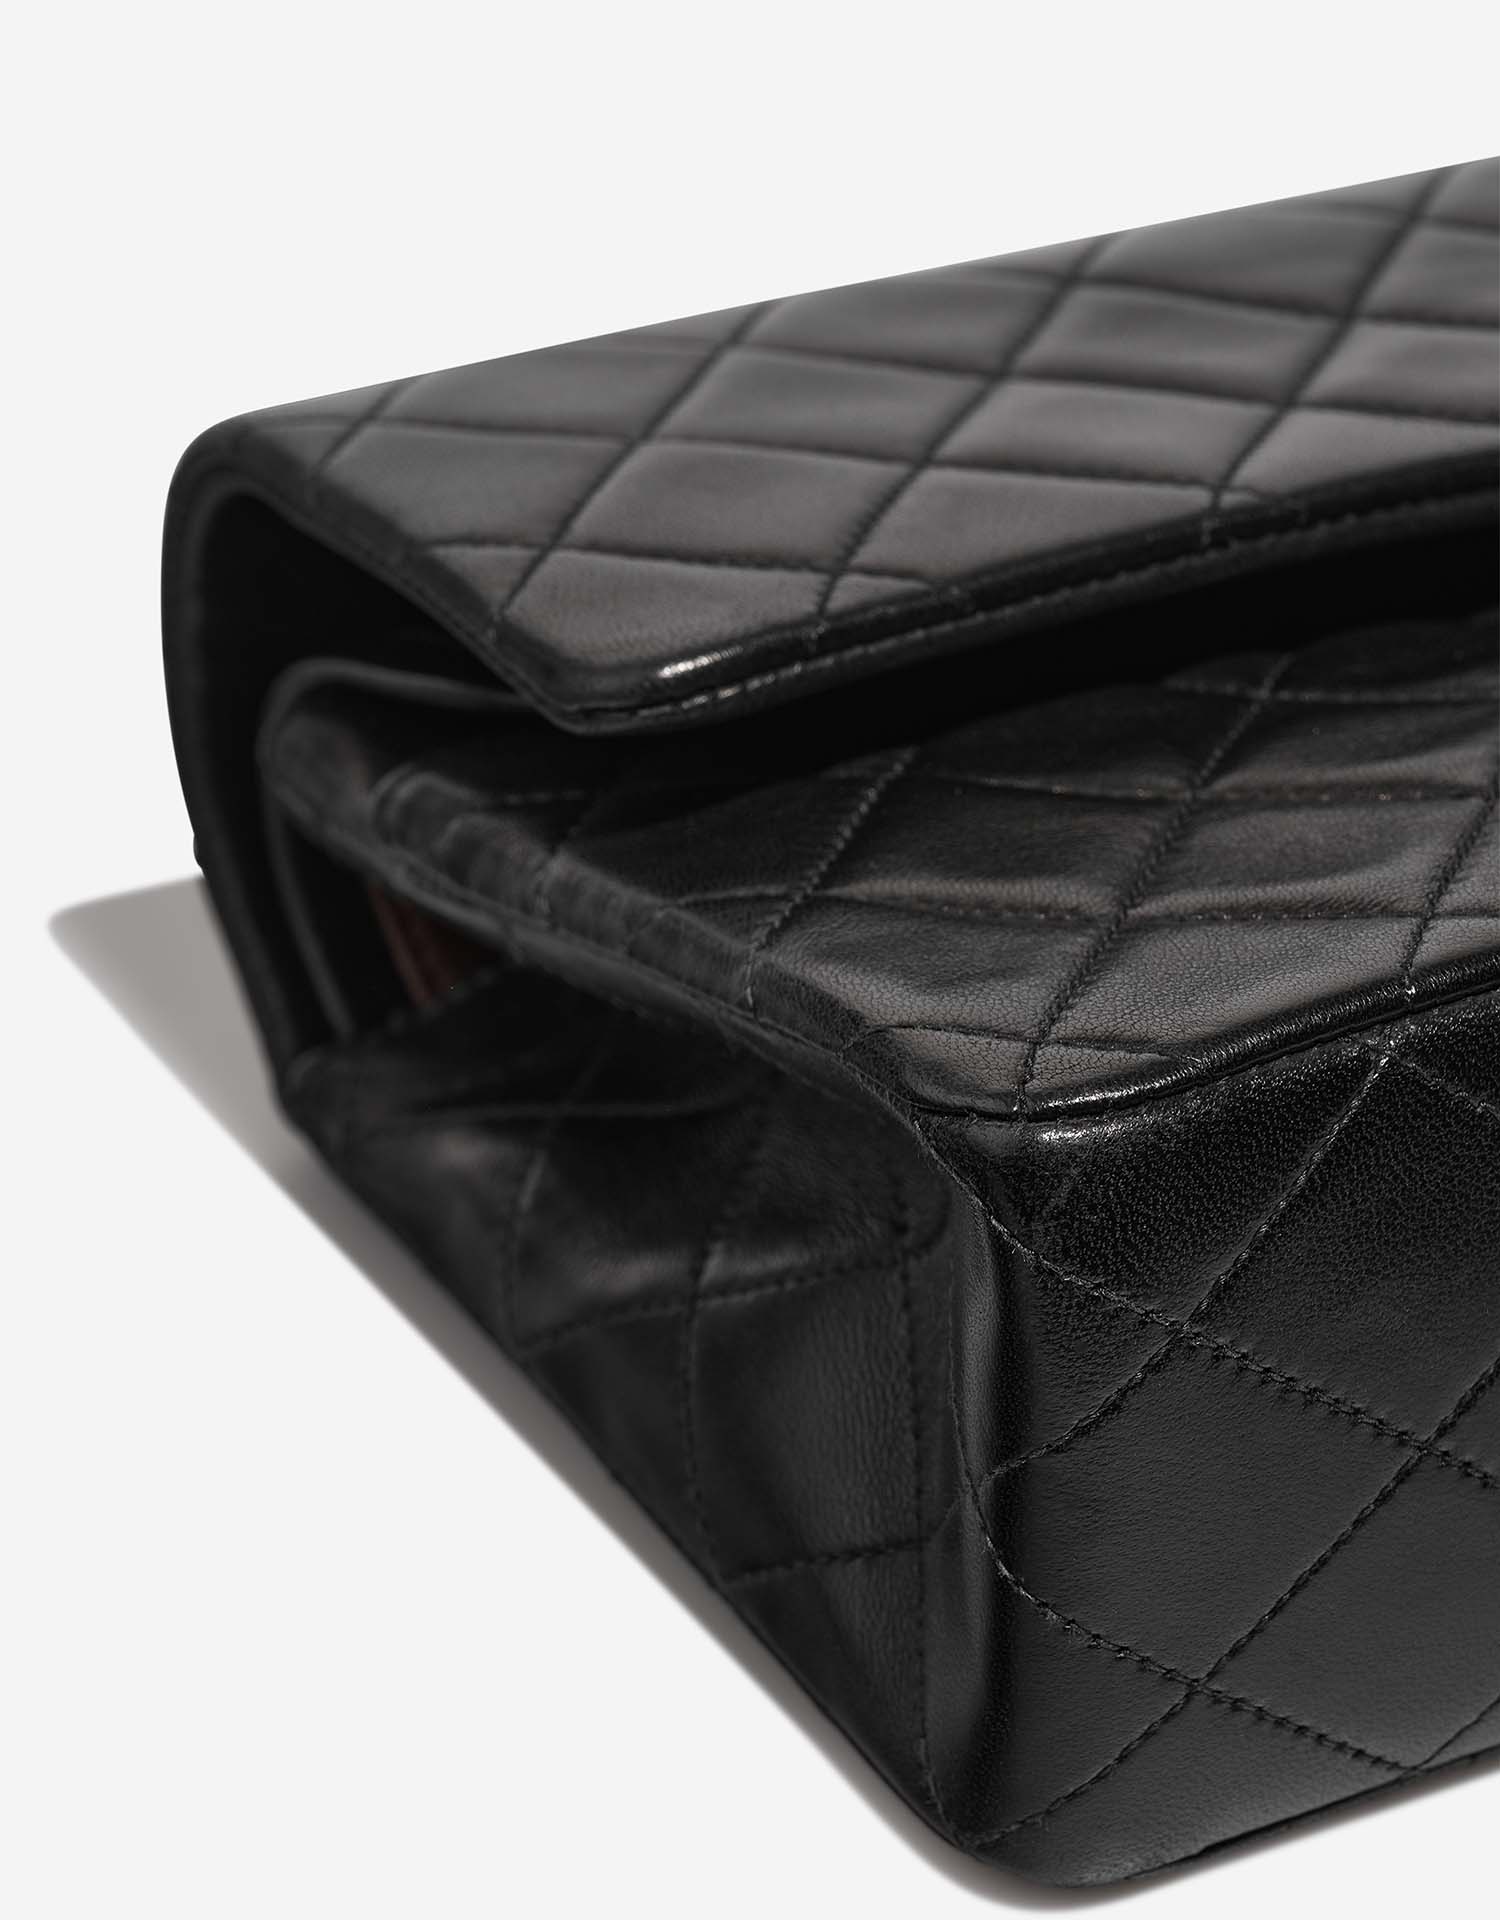 Chanel Timeless Medium Black signs of wear| Sell your designer bag on Saclab.com